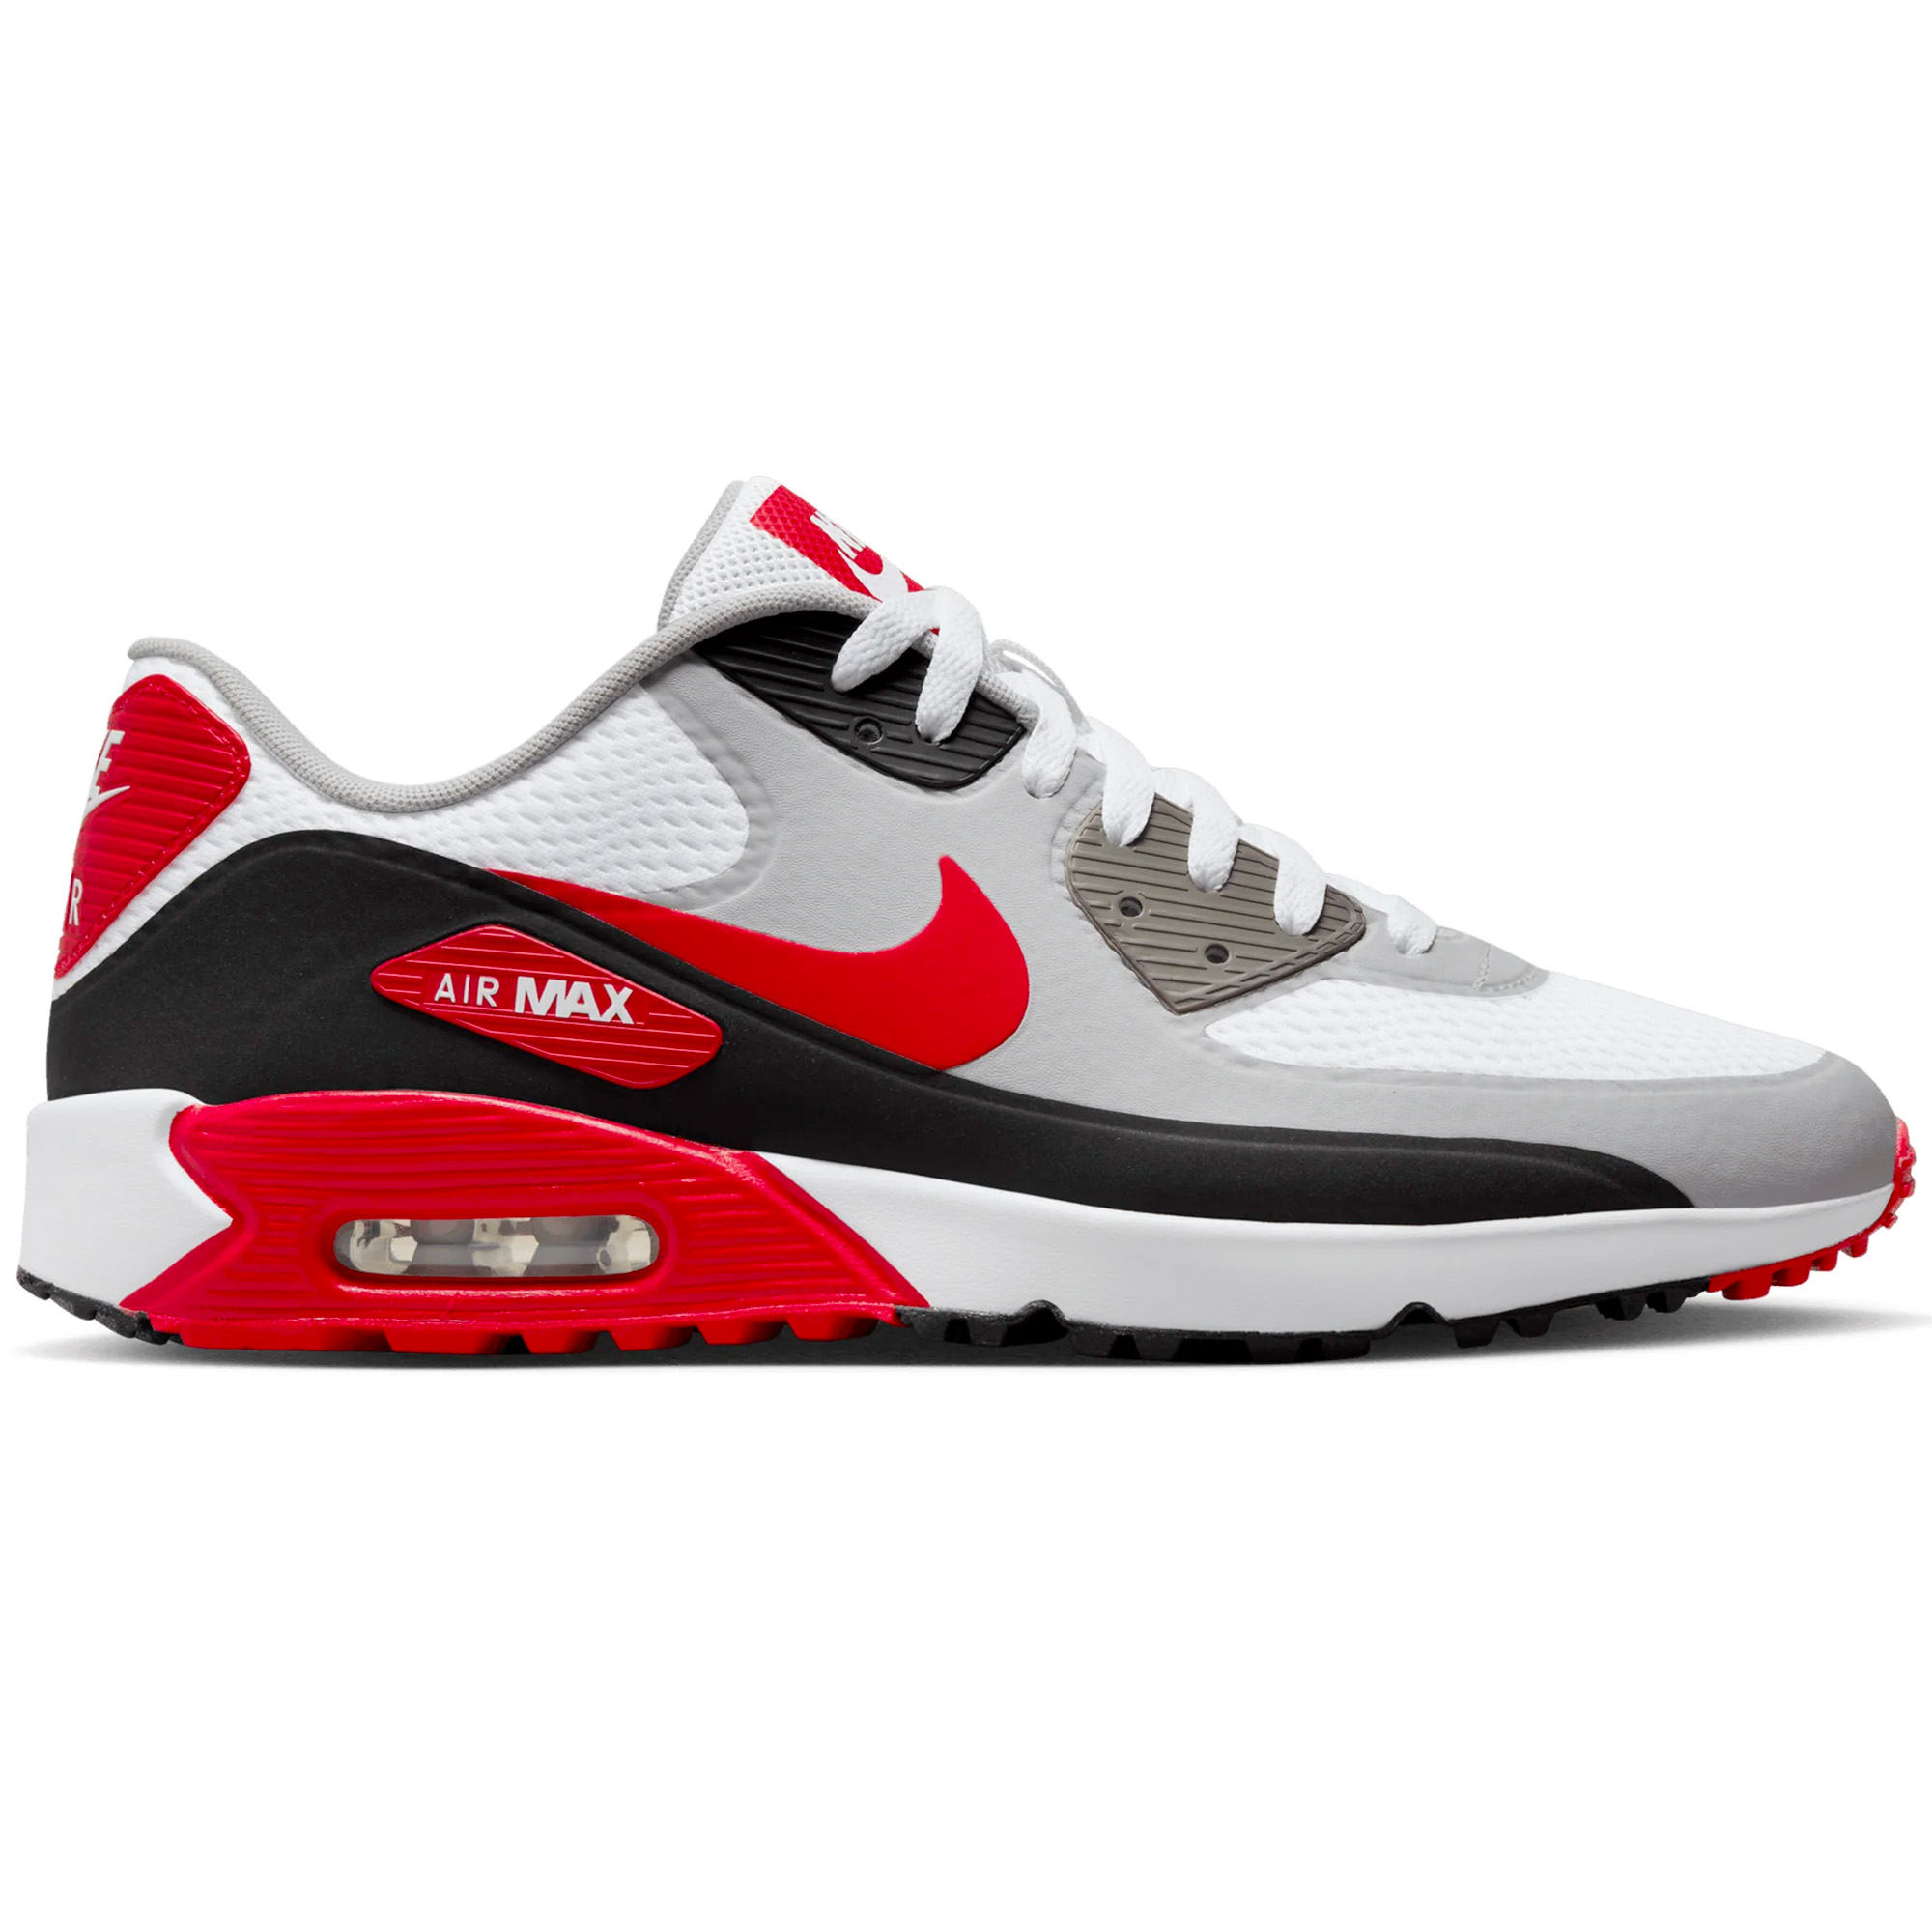 Nike Air Max 90 G Spikeless Waterproof Golf Shoes  - White/University Red/Black